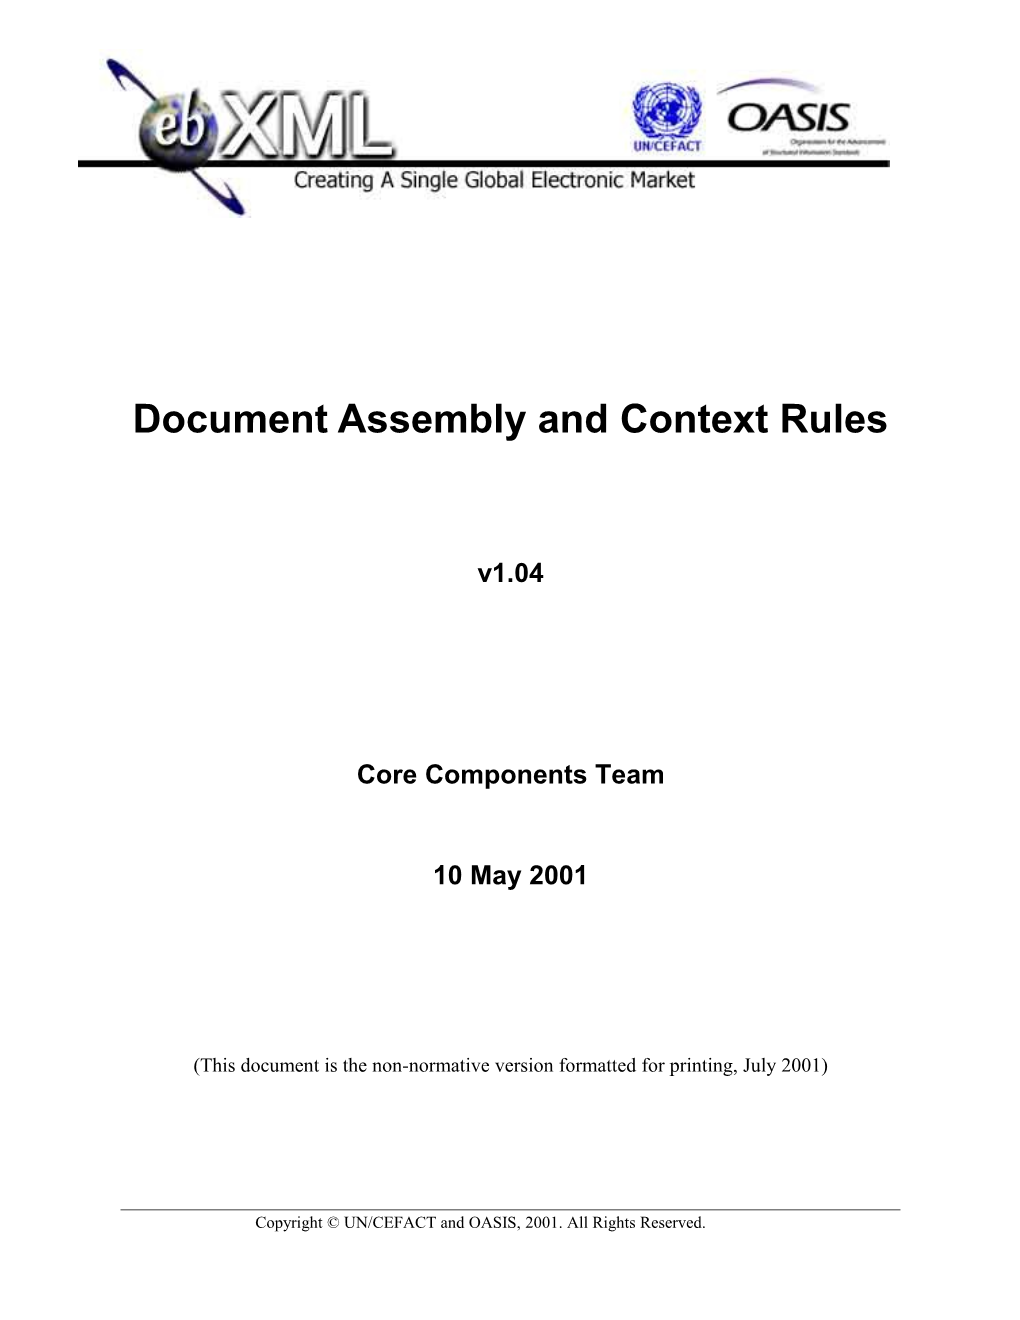 Core Components Teammarch May 2001